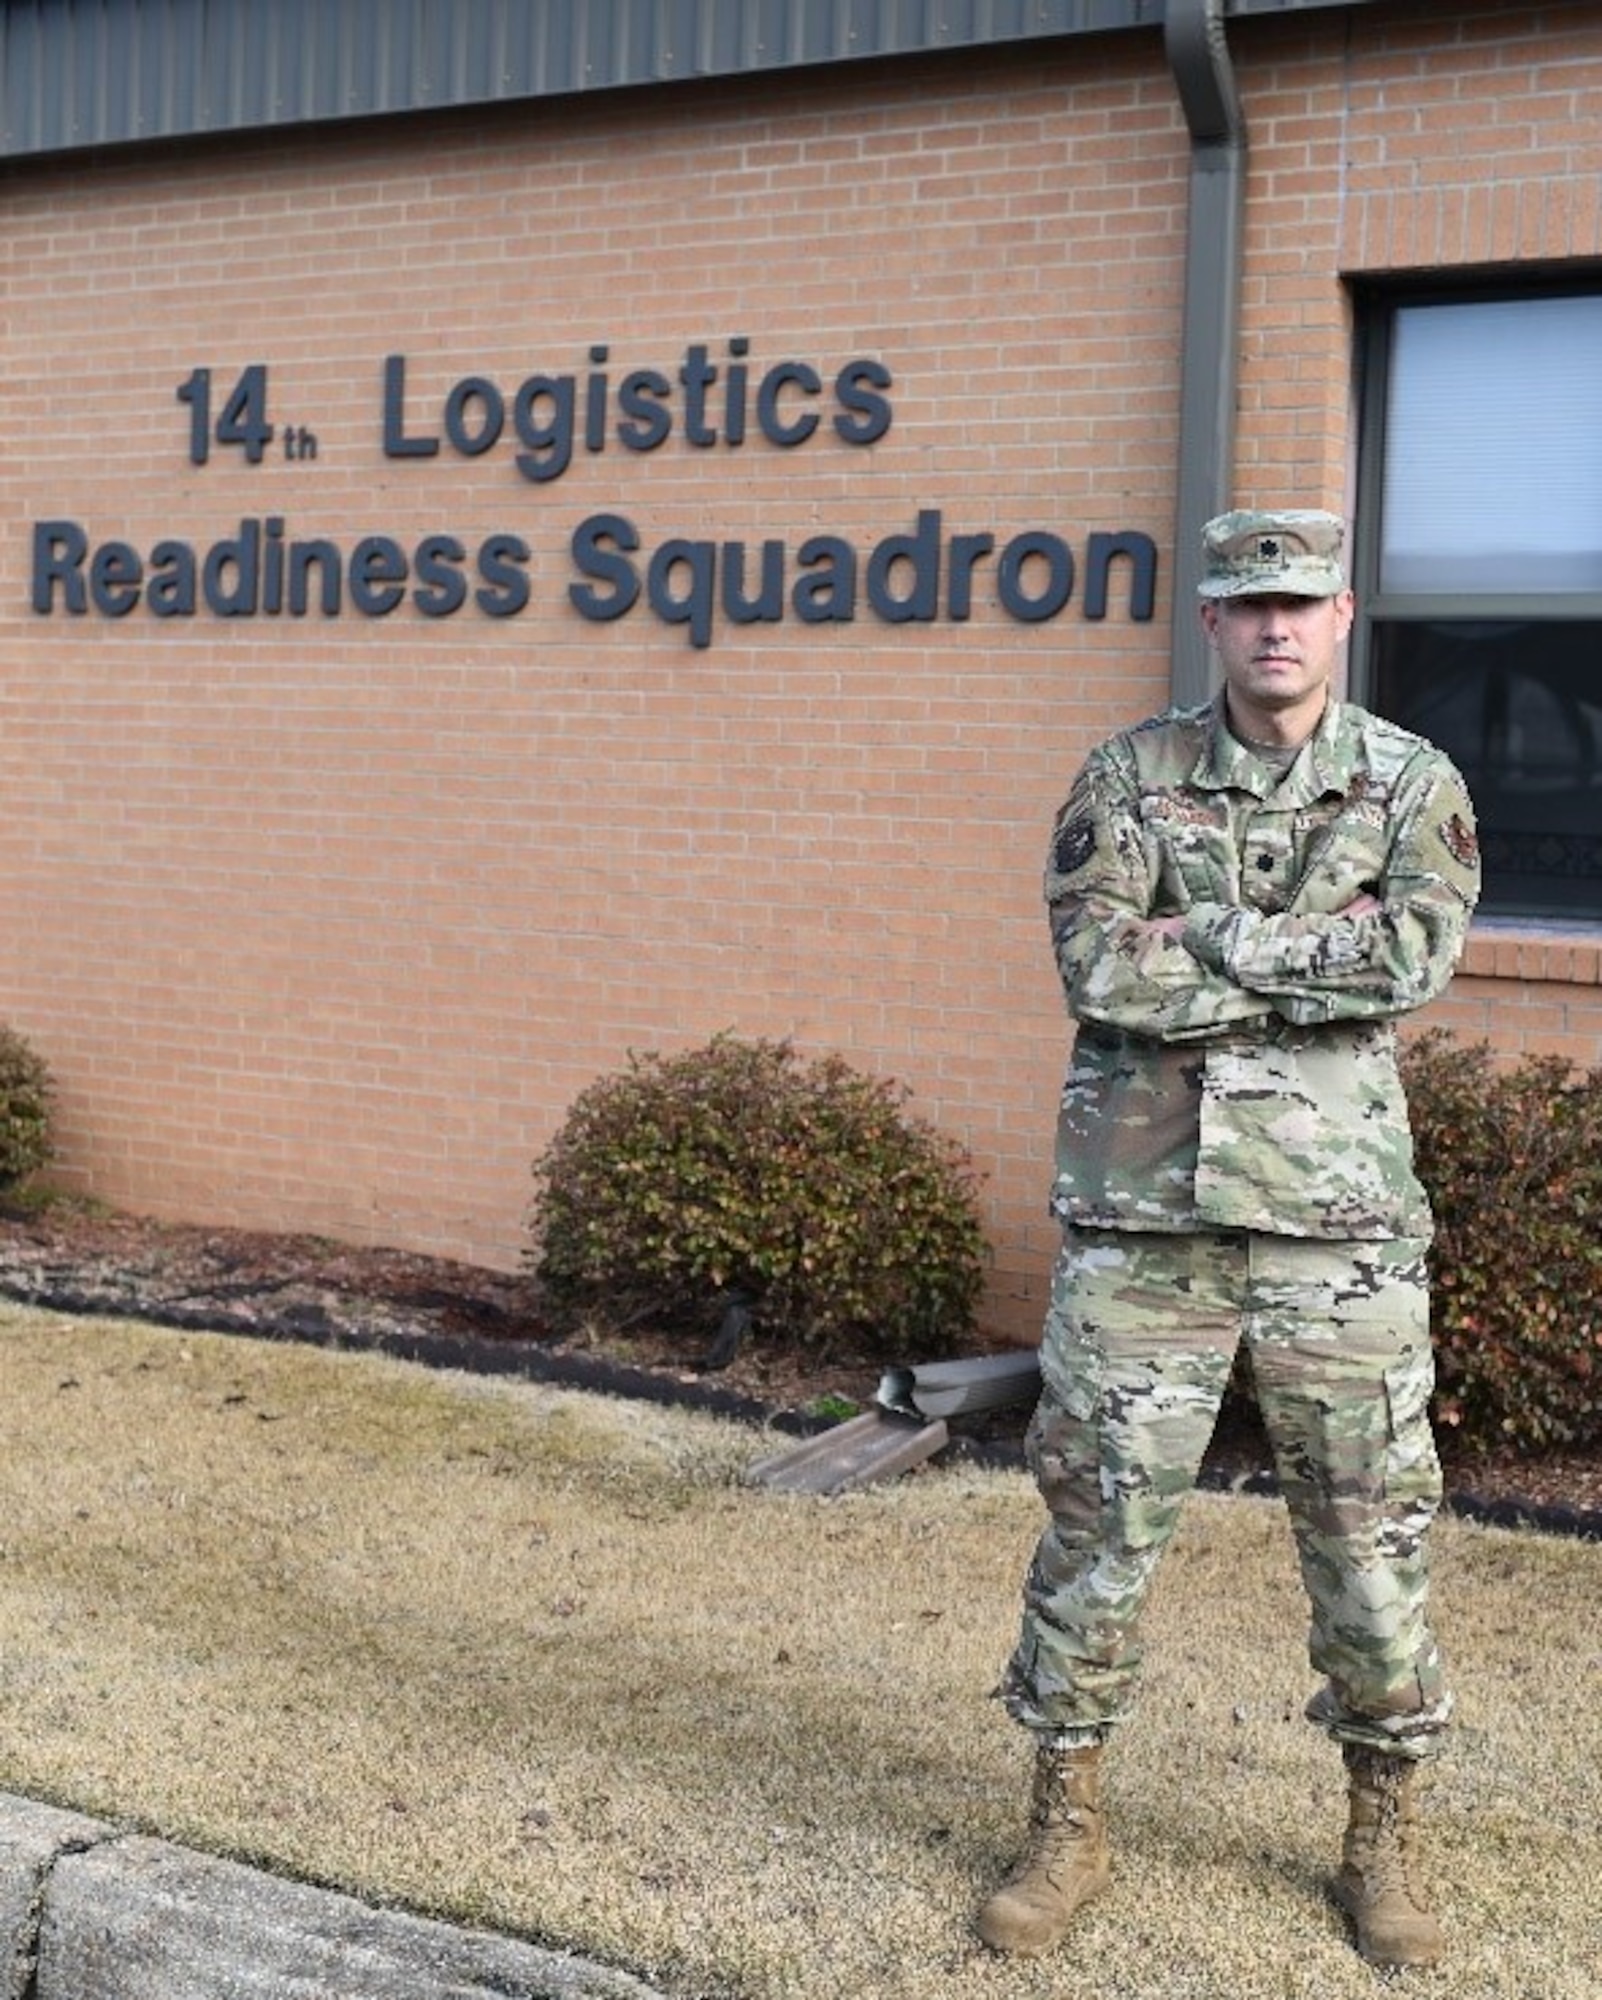 U.S. Air Force Lt. Col. Michael Kennedy, 14th Logistics Readiness Squadron commander, stands in front of the 14th LRS building on Jan. 27, 2021, at Columbus Air Force Base, Miss. The 14th LRS provides effective logistics support for the 14th Flying Training Wing's flying training mission. (U.S. Air Force photo by Airman 1st Class Davis Donaldson)